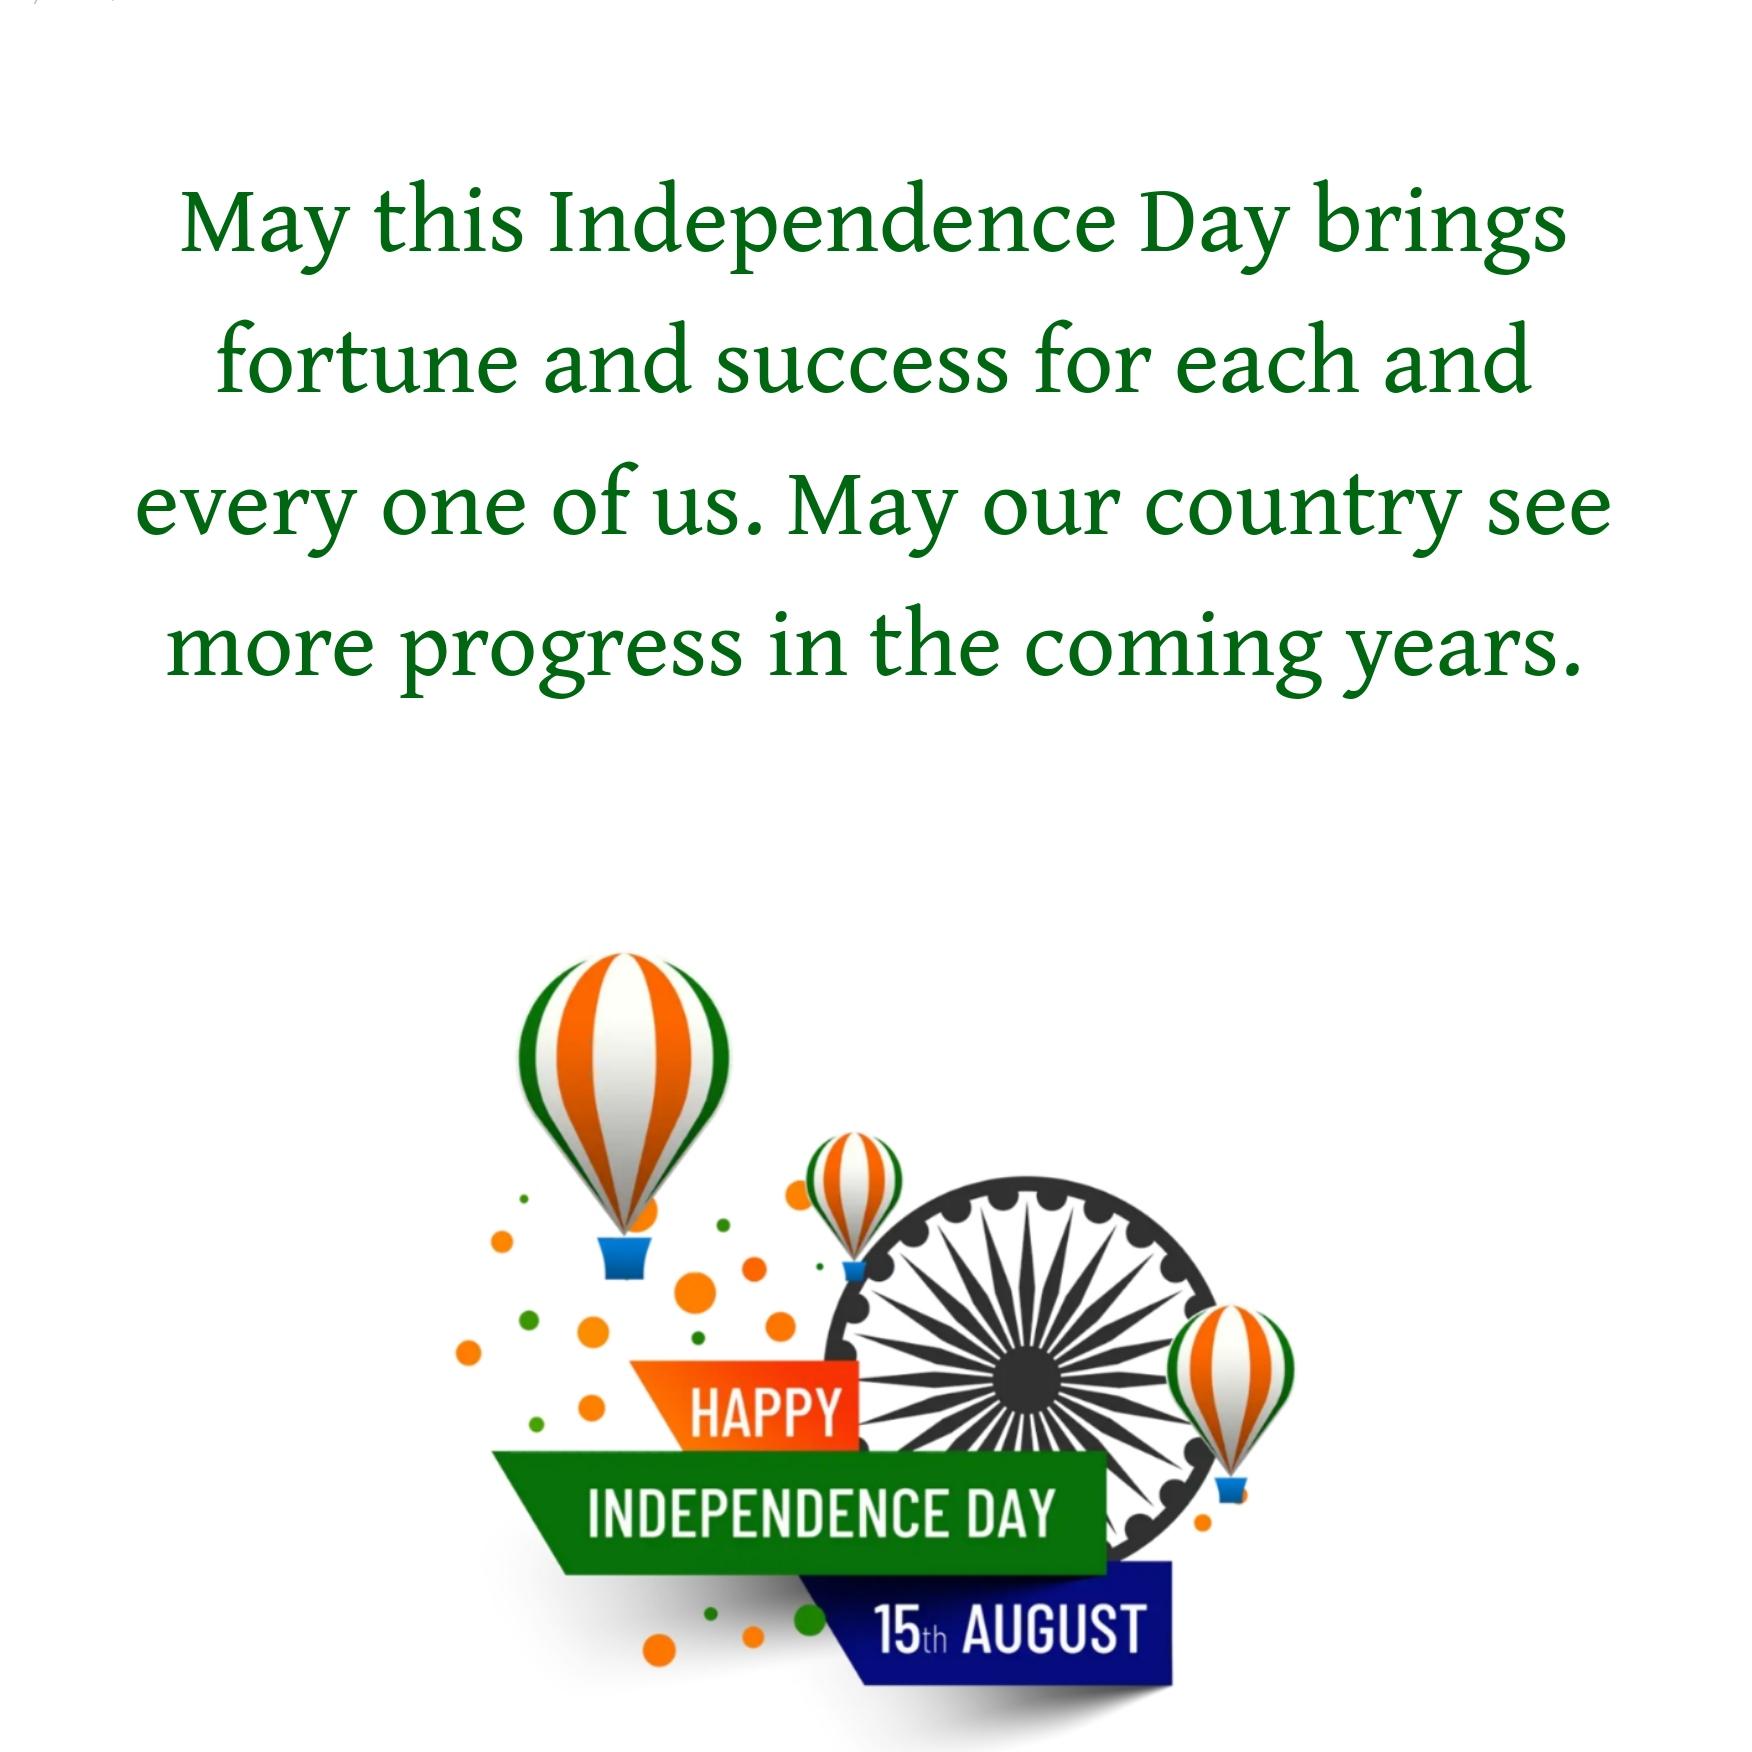 May this Independence Day brings fortune and success